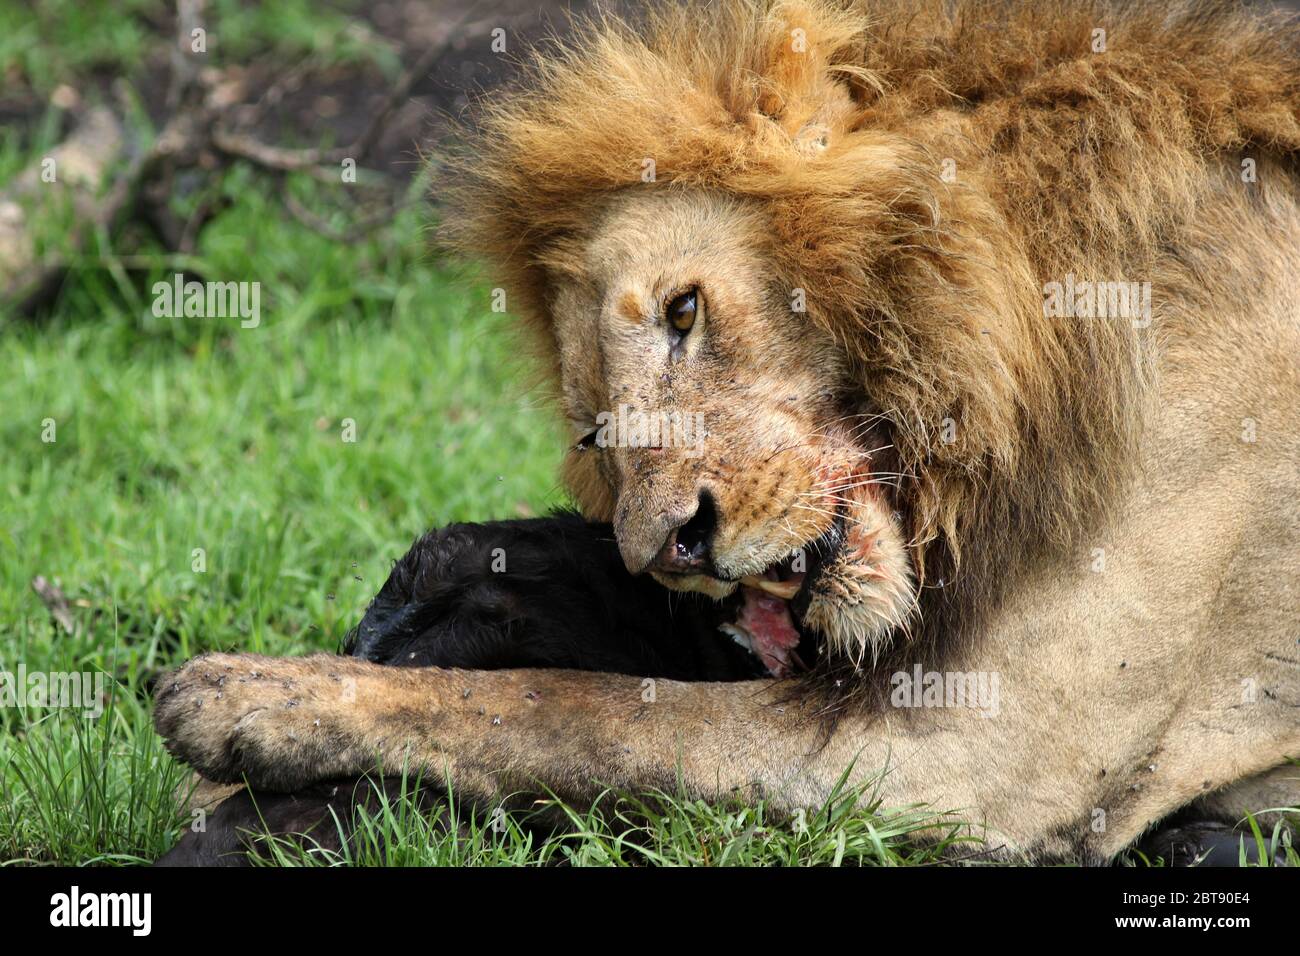 a large male lion with a blood-smeared mouth eats the freshly torn prey of a buffalo calf, close-up Stock Photo